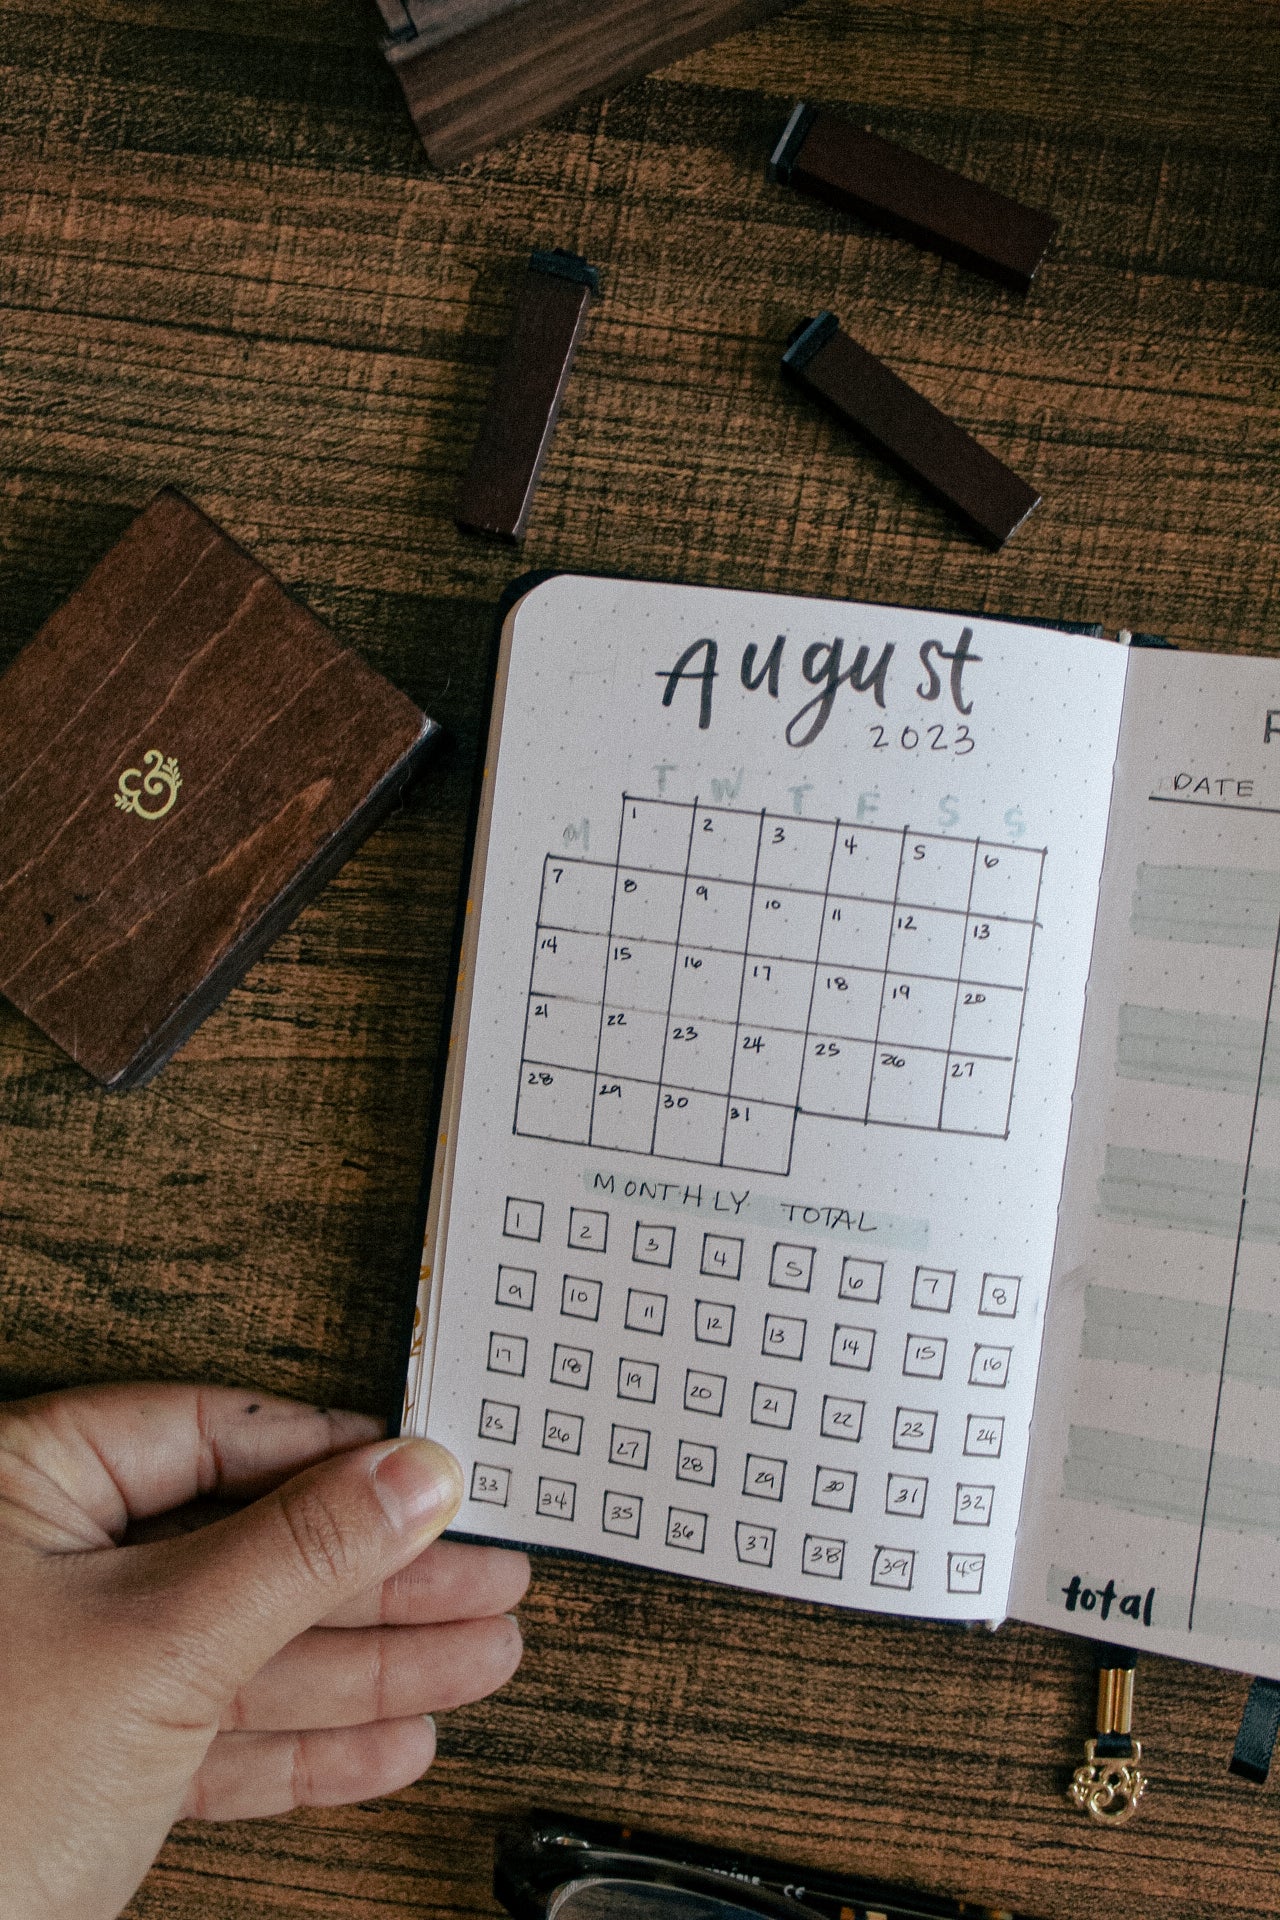 A pocket notebook is lying open on a desk. On the page is a small calendar spread for August 23 and a running goal tracker for the month.